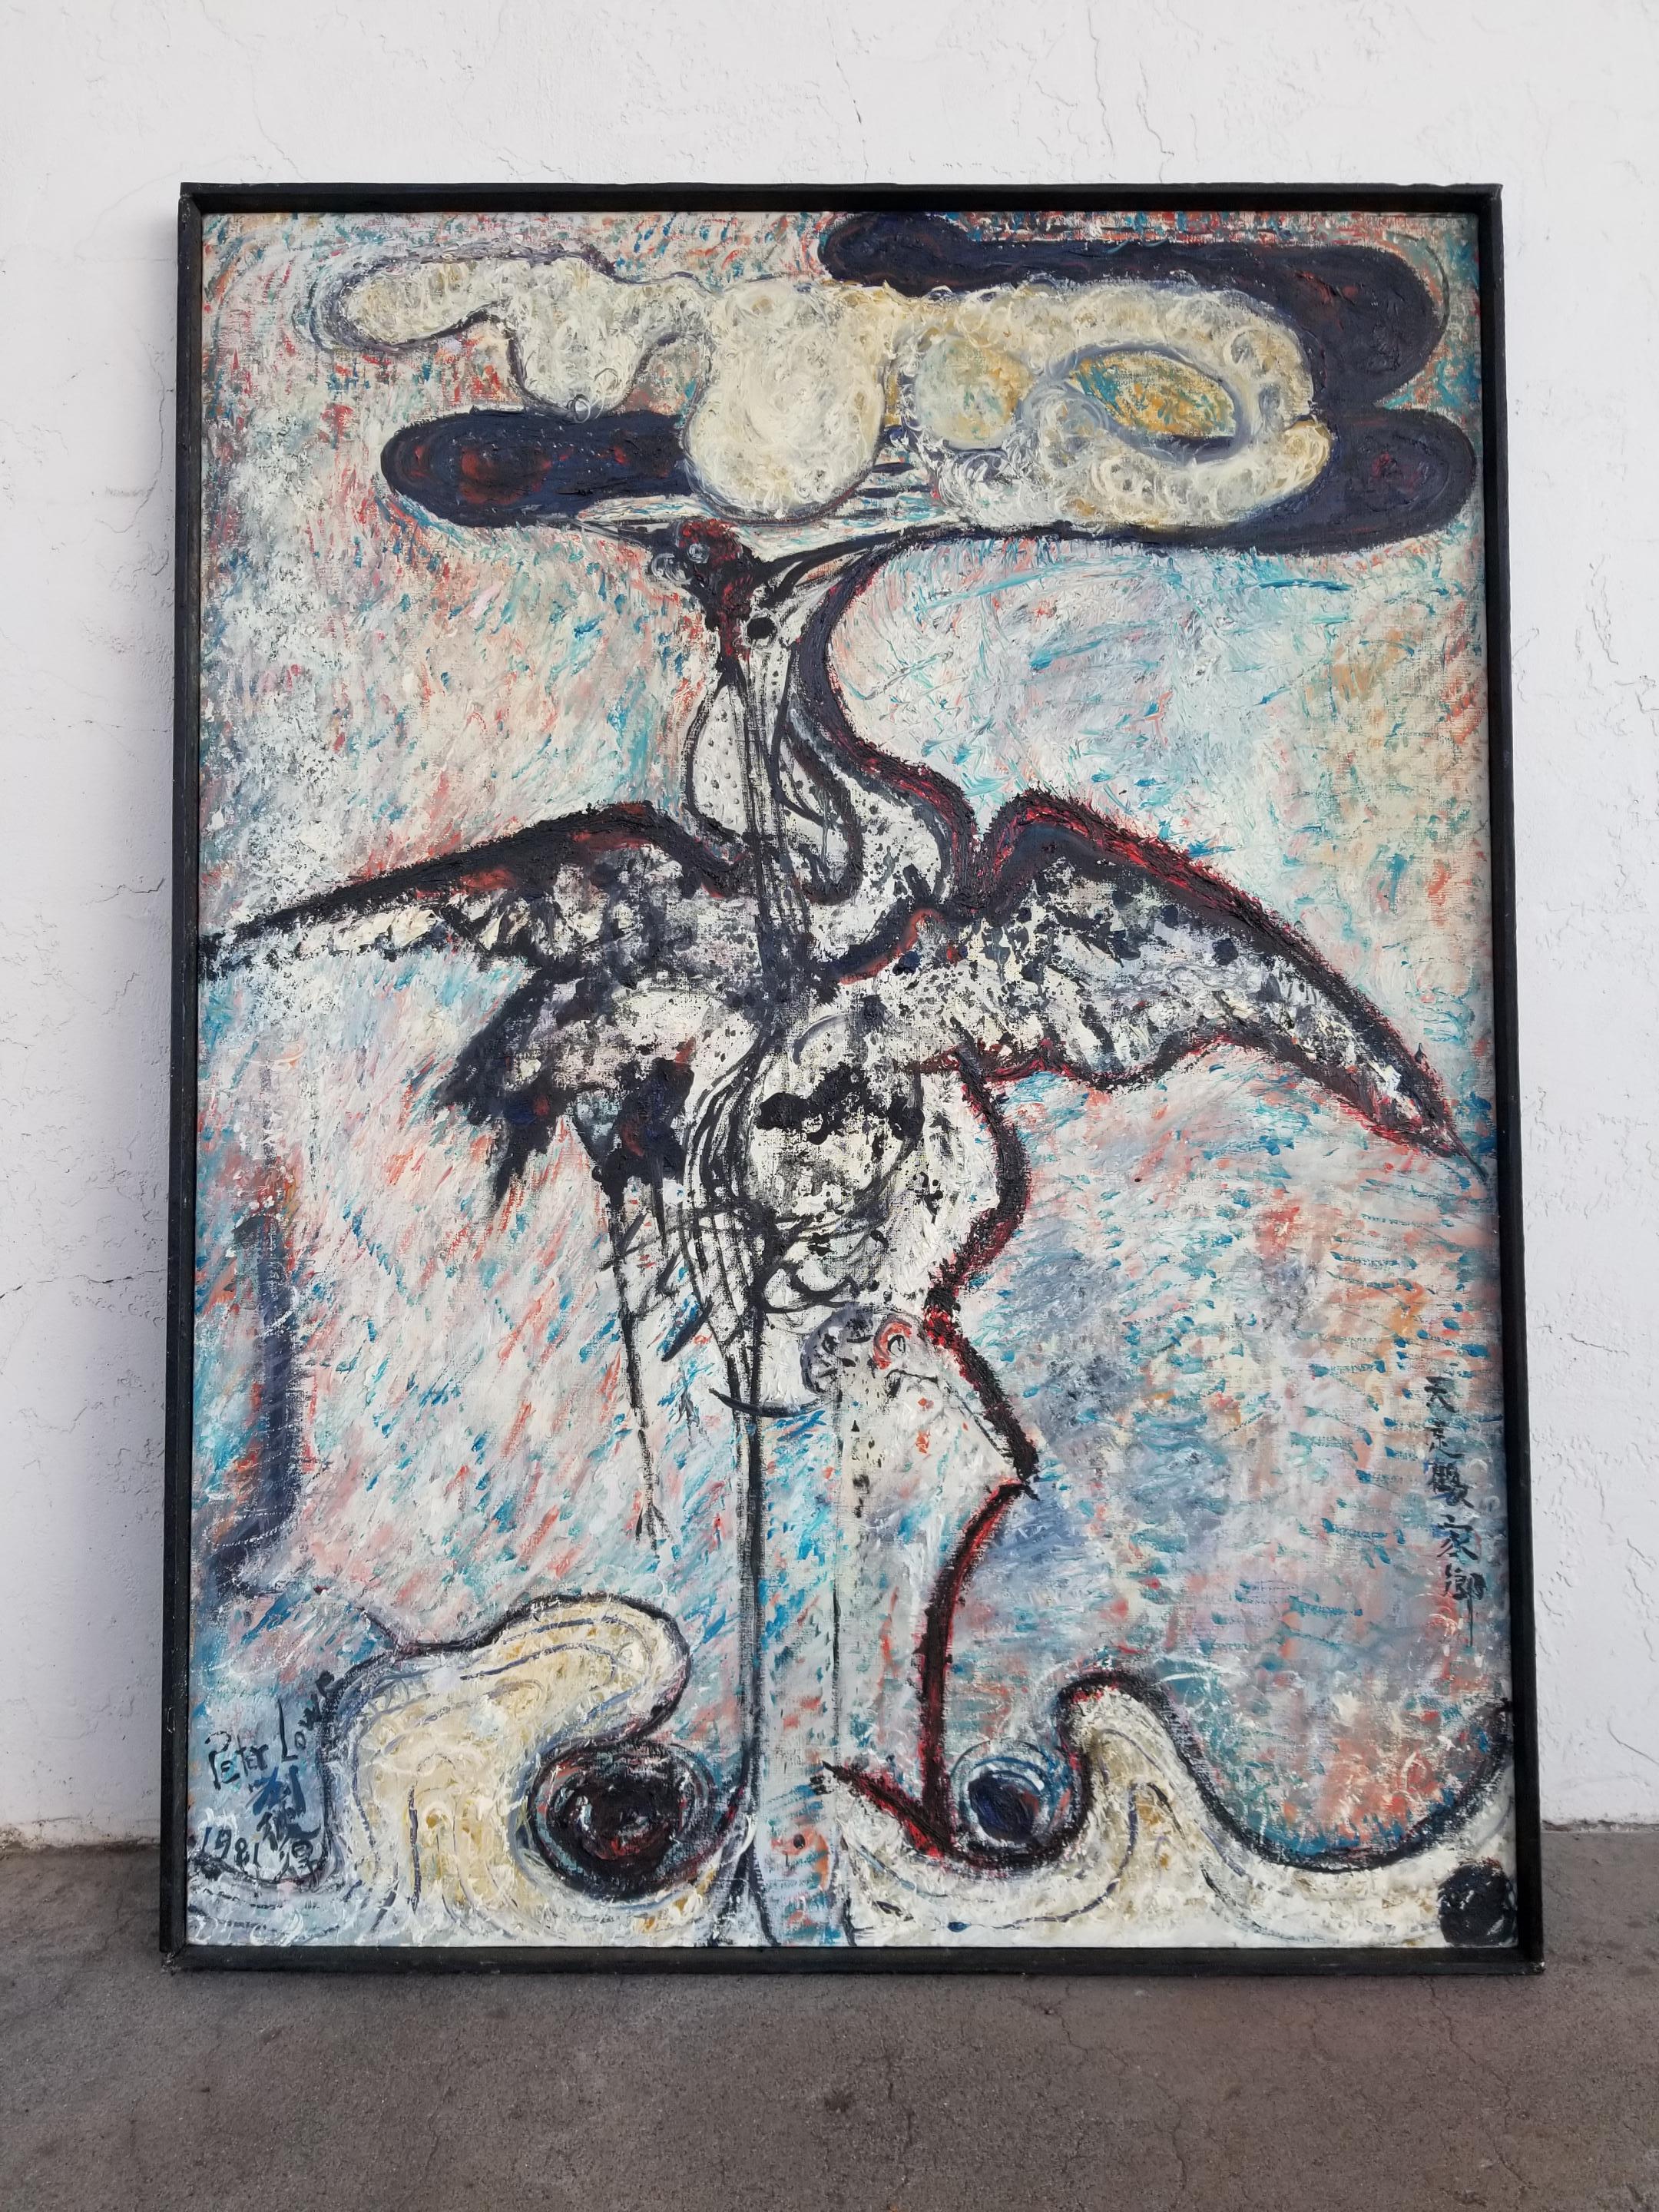 Late 20th century abstract oil painting depicting a bird by California artist Peter Lowe. Highly textured painting on canvas. Mounted in original painted wood rustic frame. Signed & dated lower left, 1981. Member Society of Chinese Artists of